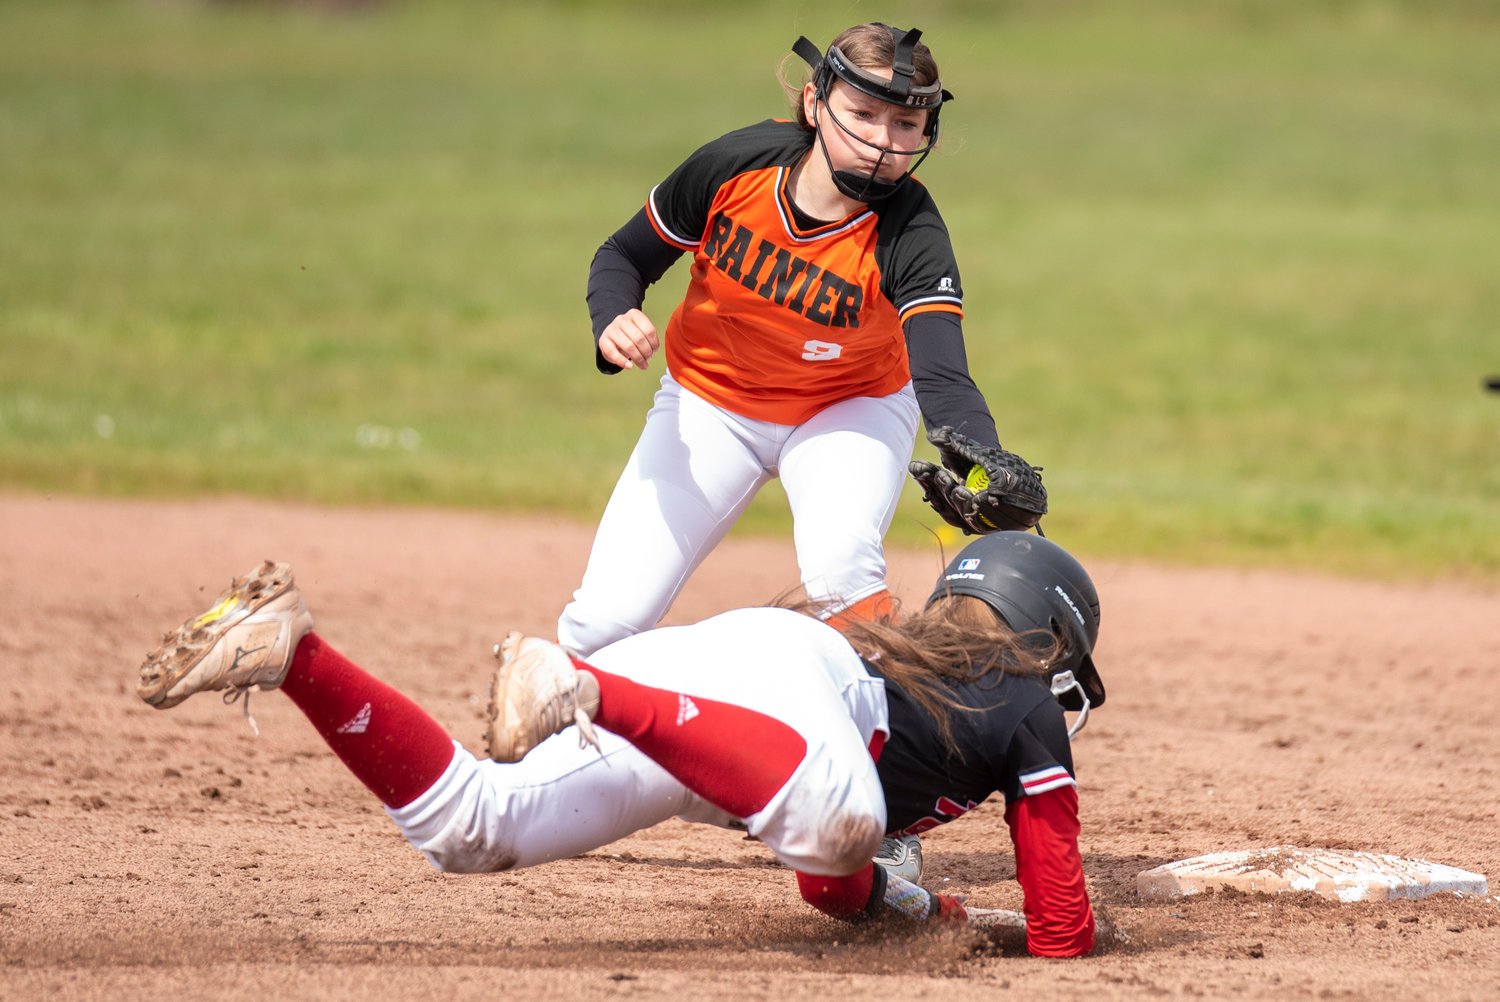 Rainier shortstop Brooklynn Swenson (9) tags Toledo's Averie Robins out on a steal attempt during a game in Toledo on April 25.